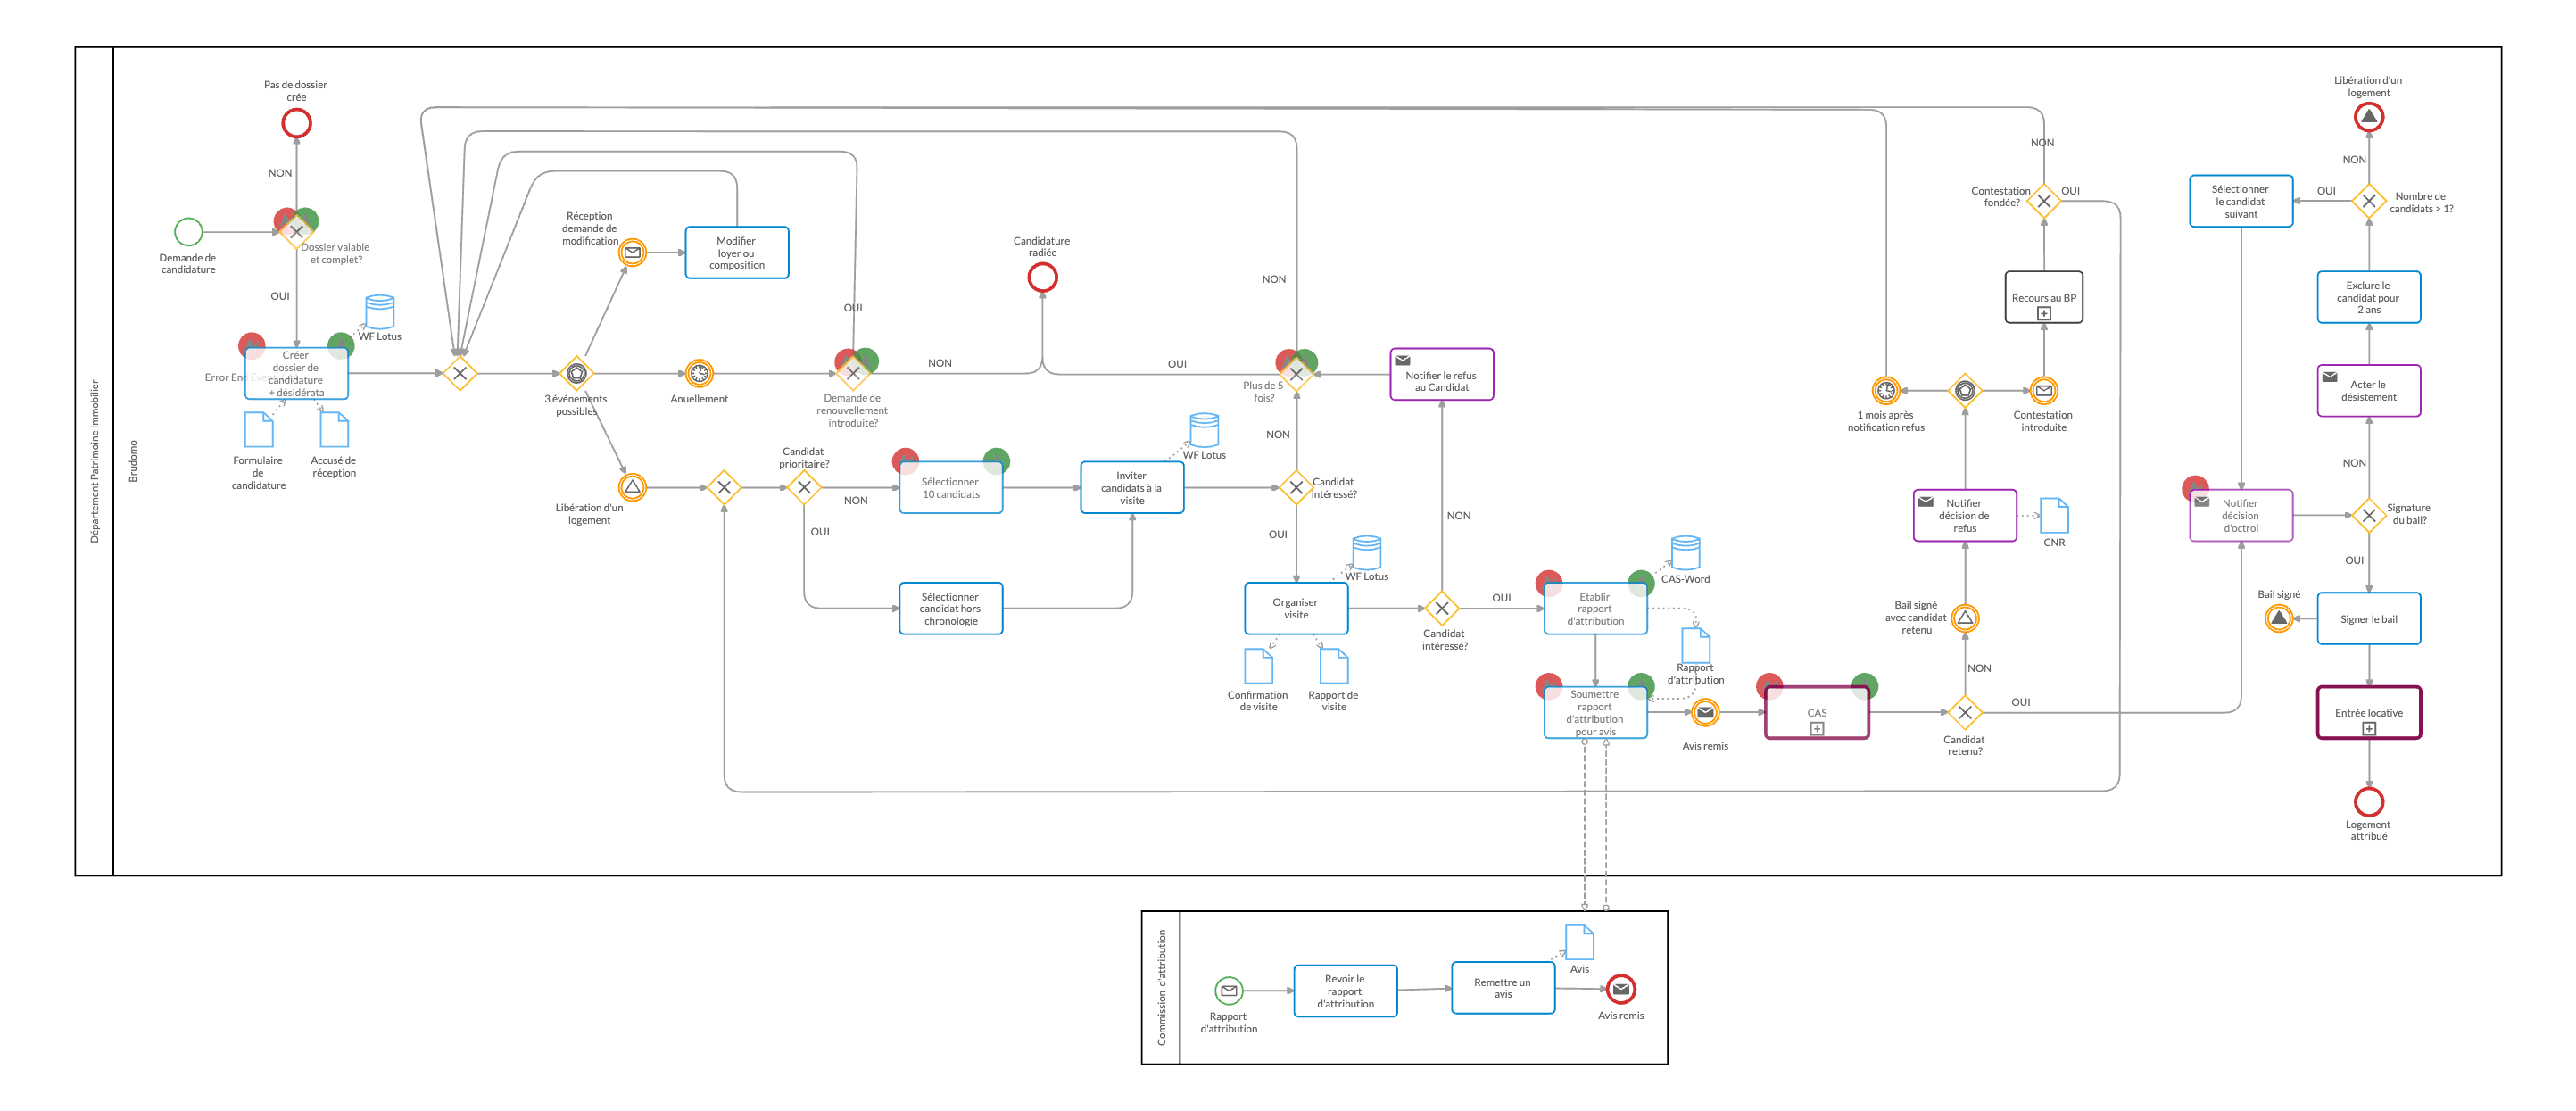 BPMN workflow of a housing allocation process